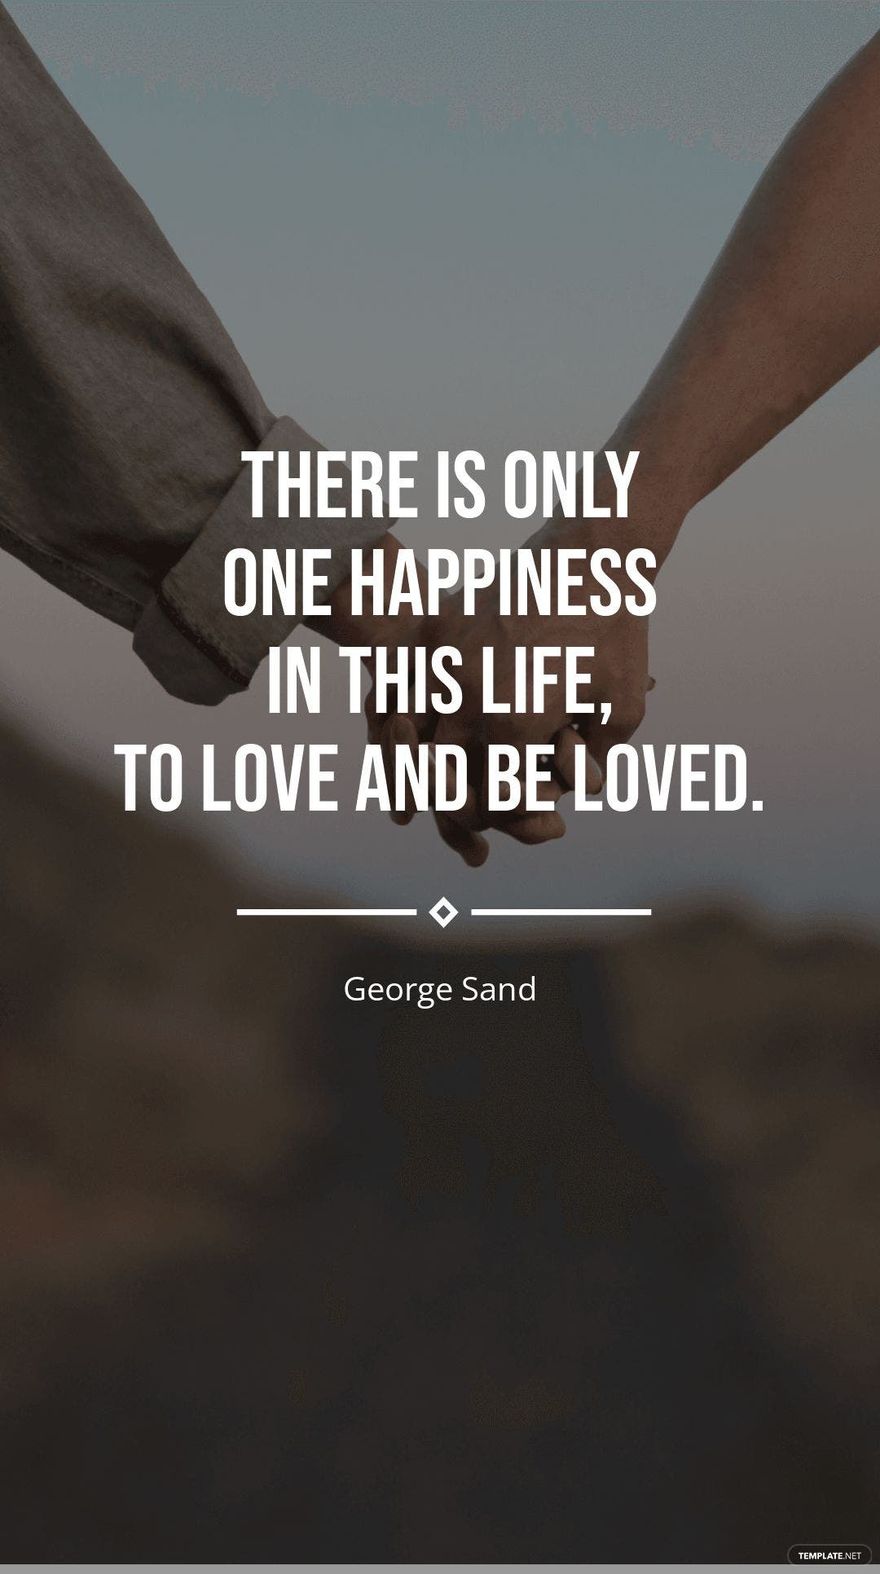 George Sand - There is only one happiness in this life, to love and be loved.